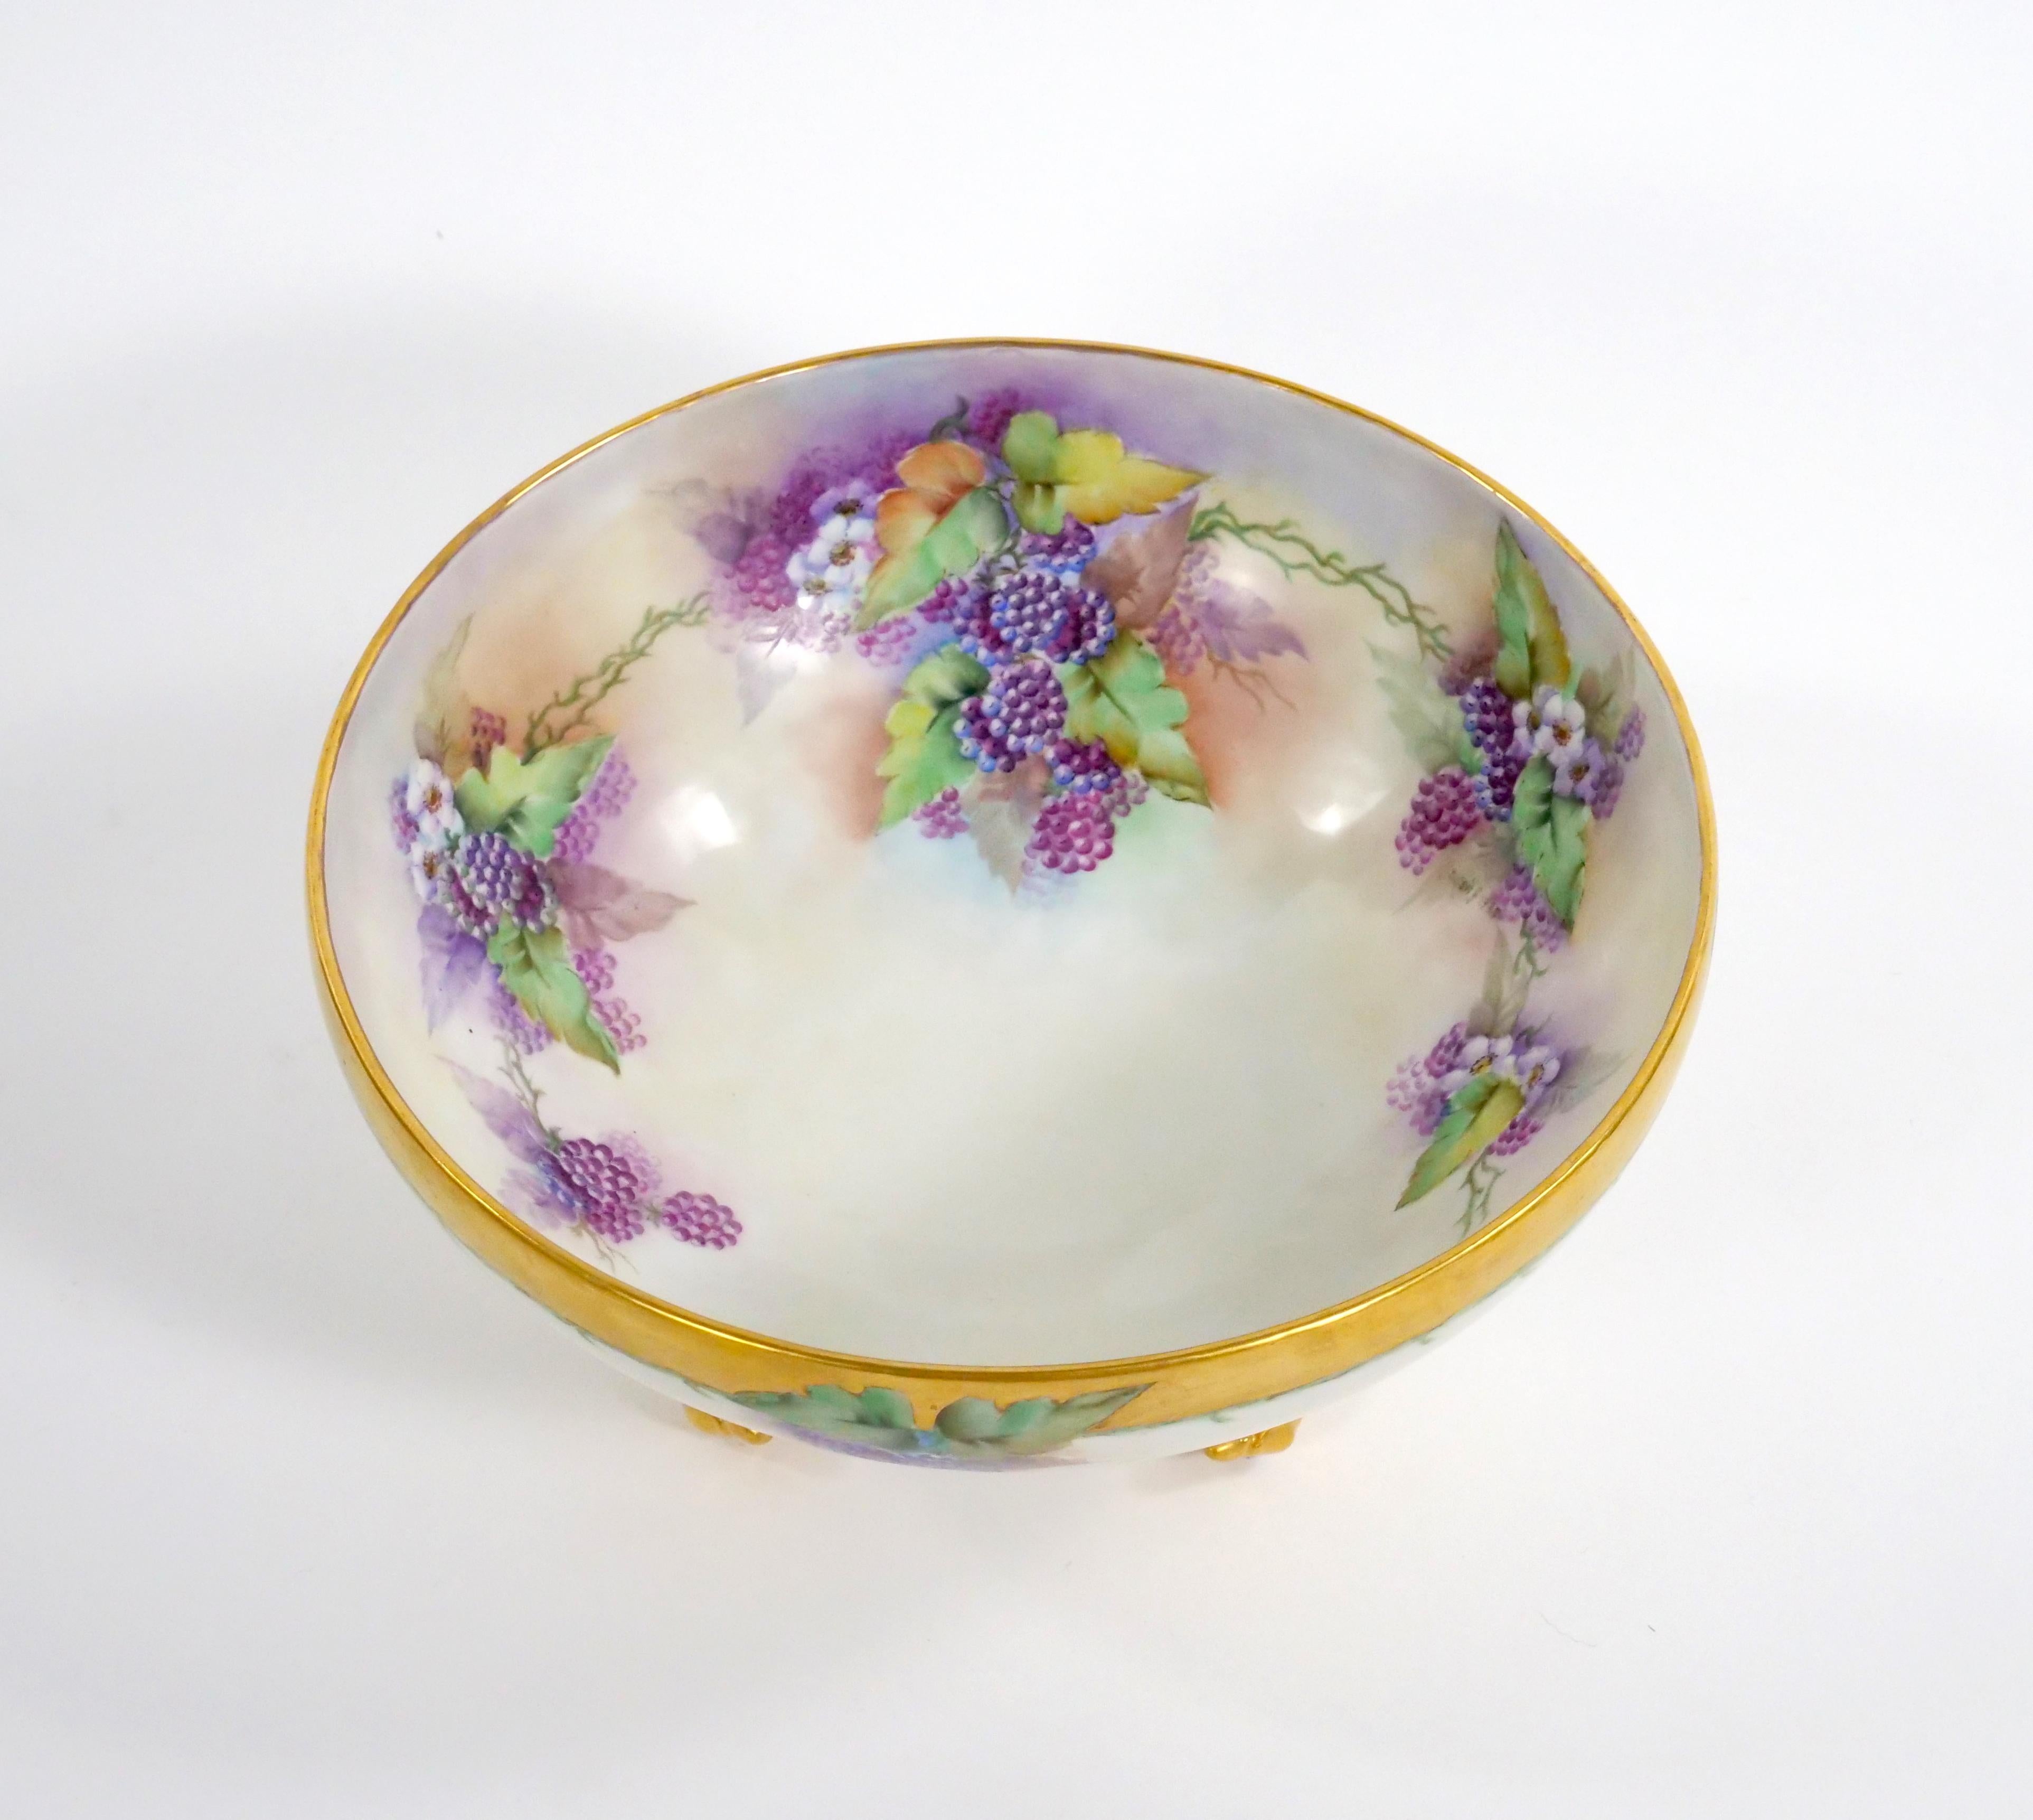 Enhance your dining or decor with this beautifully hand-painted and gilt gold-decorated French Limoges Porcelain Footed Tableware Centerpiece  / punch Bowl. This exquisite piece is a true work of art that radiates elegance and charm. The centerpiece